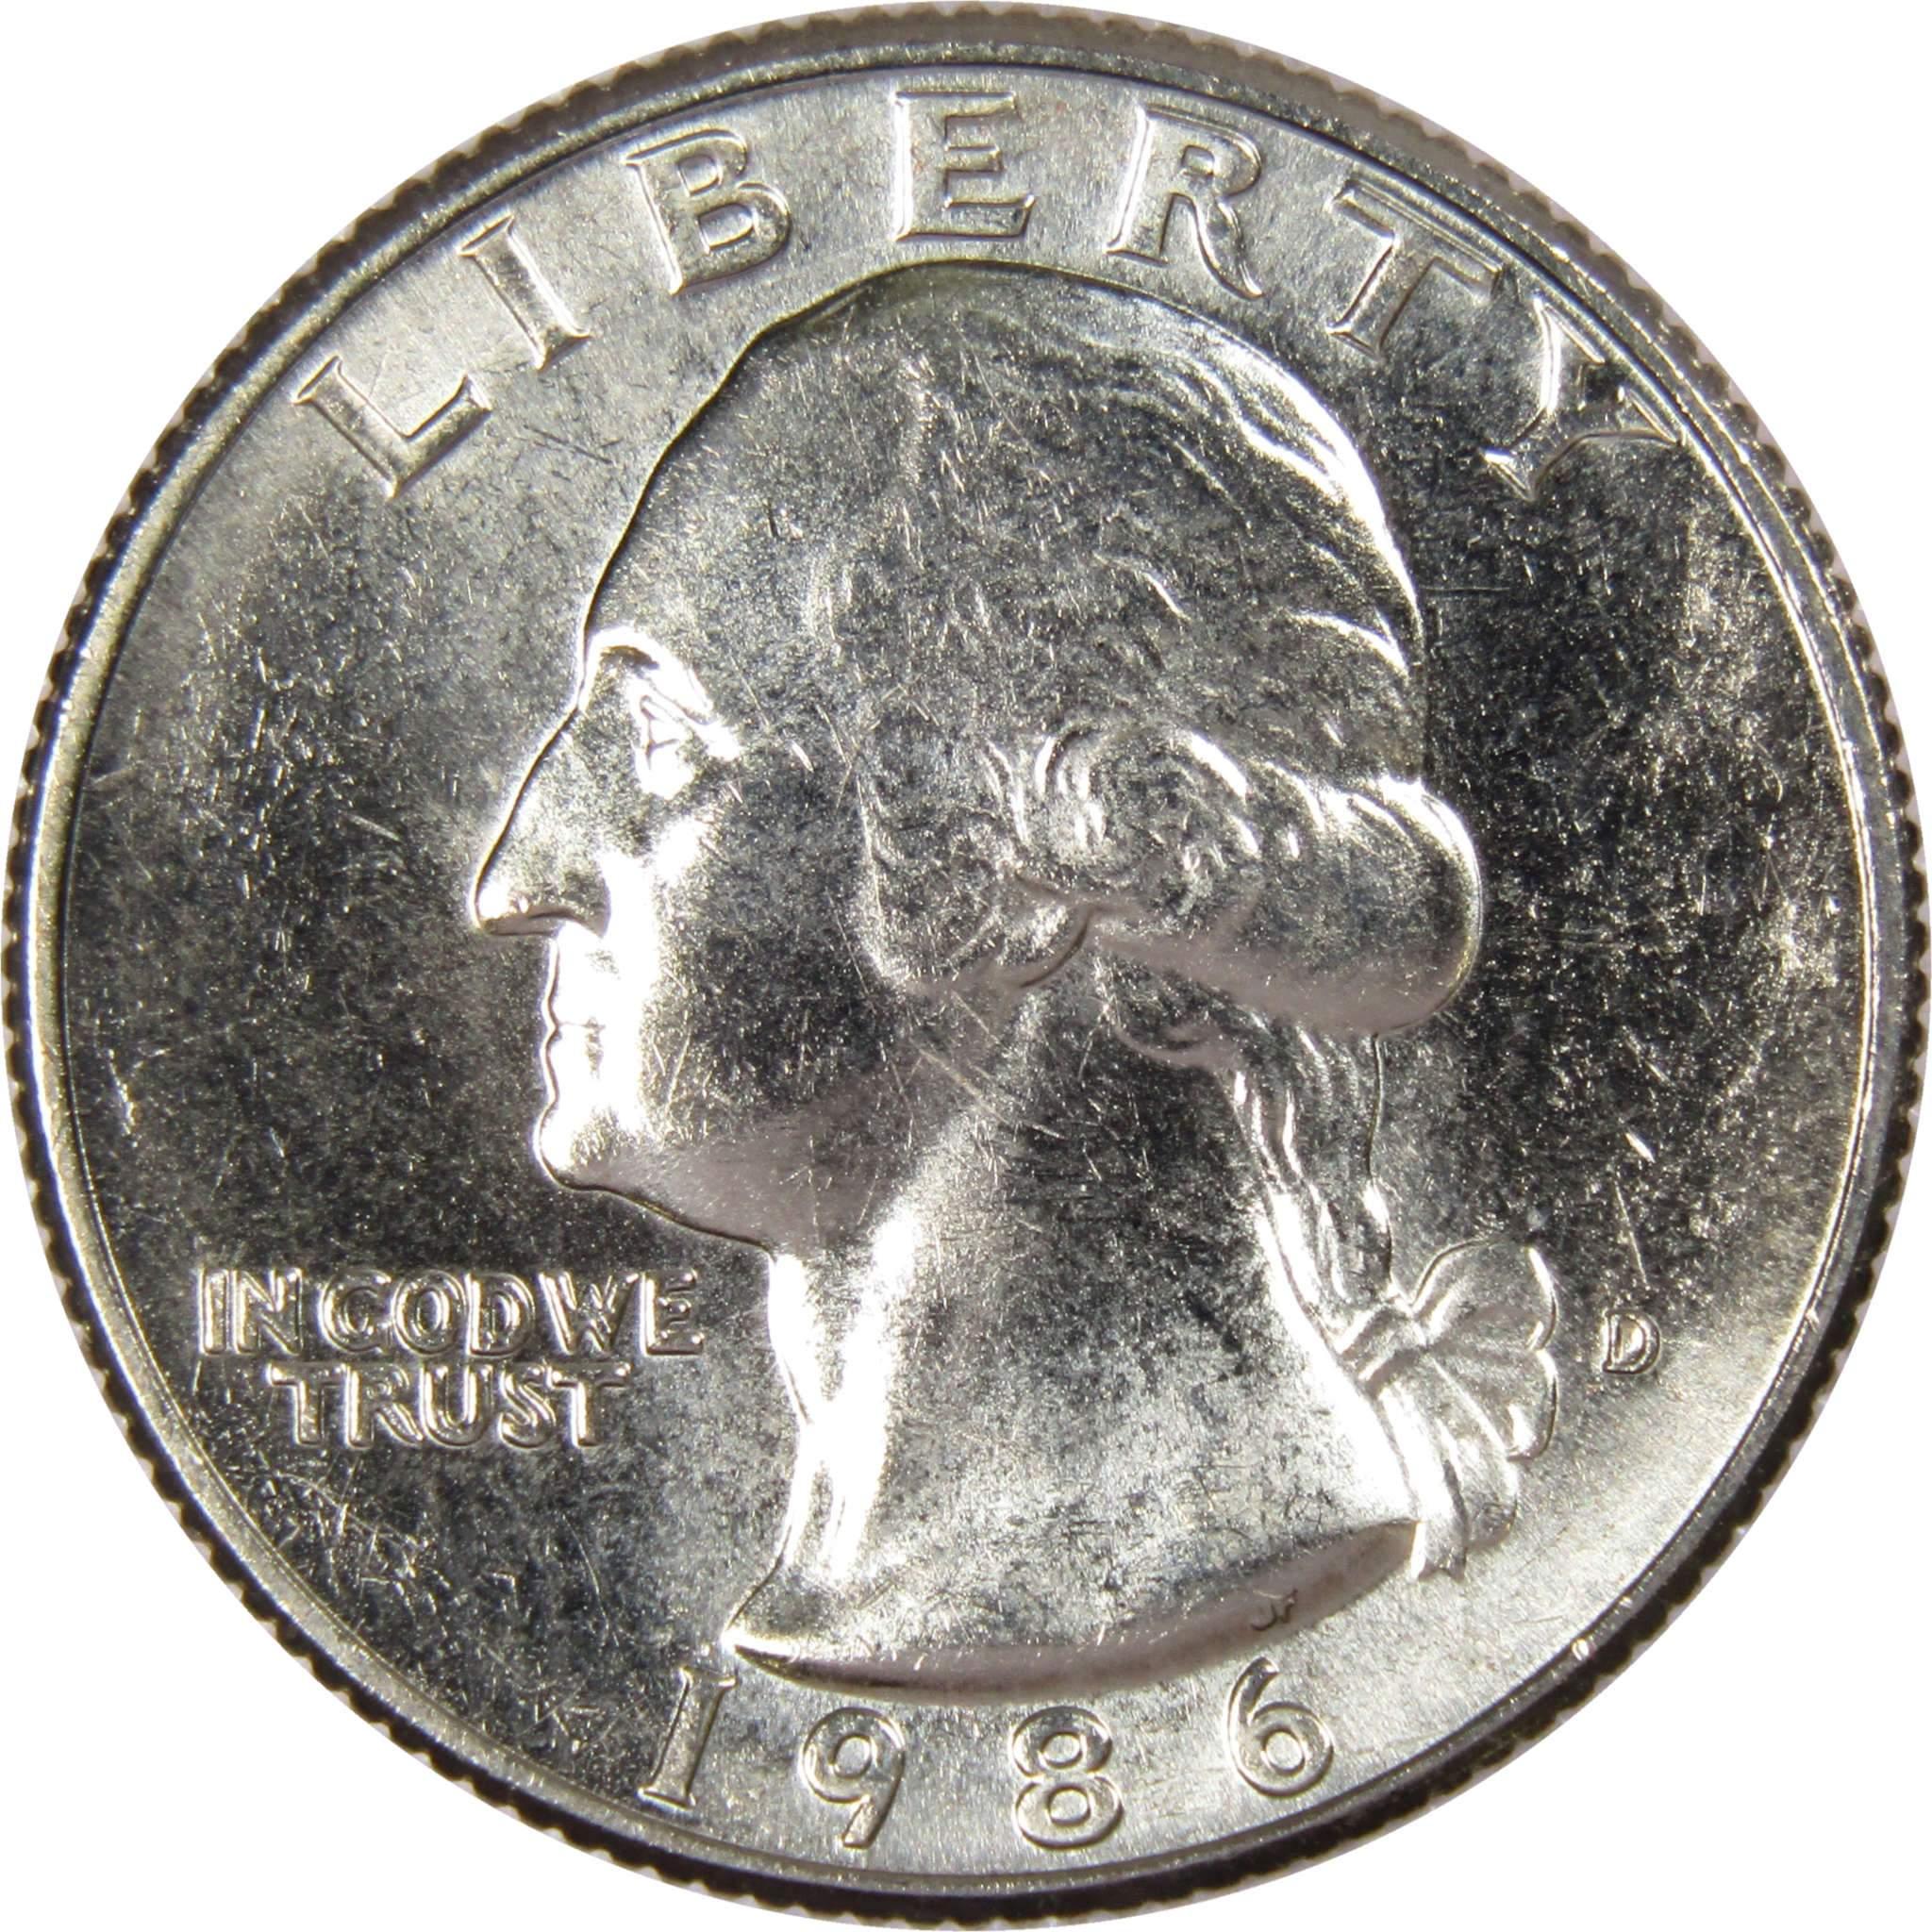 1986 D Washington Quarter BU Uncirculated Mint State 25c US Coin Collectible